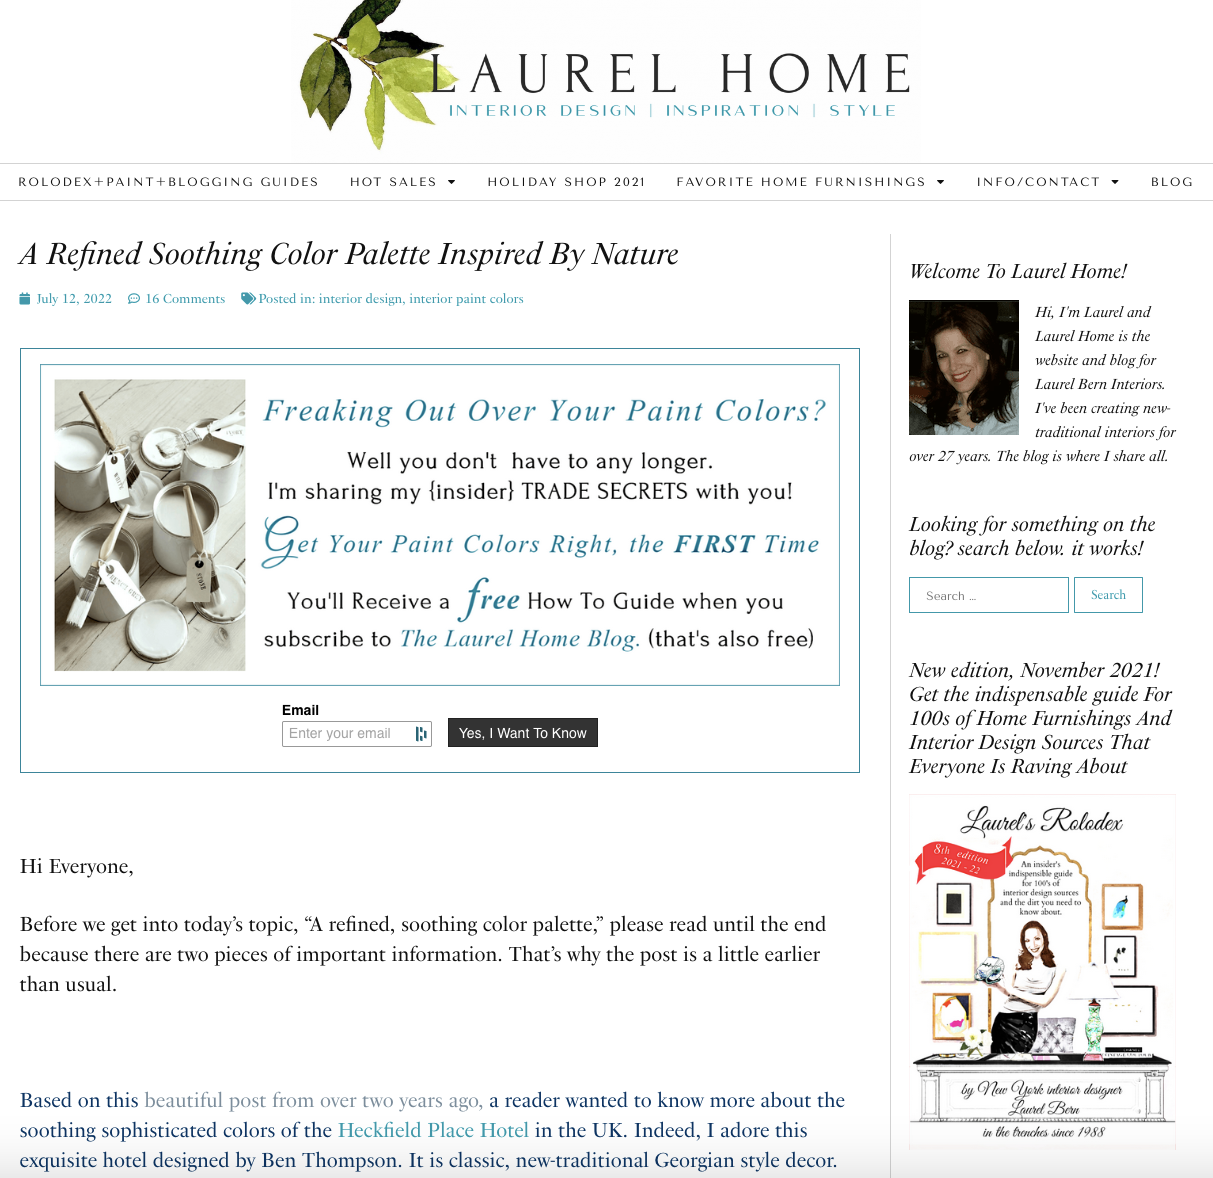 blog page for the new theme - laurel home website